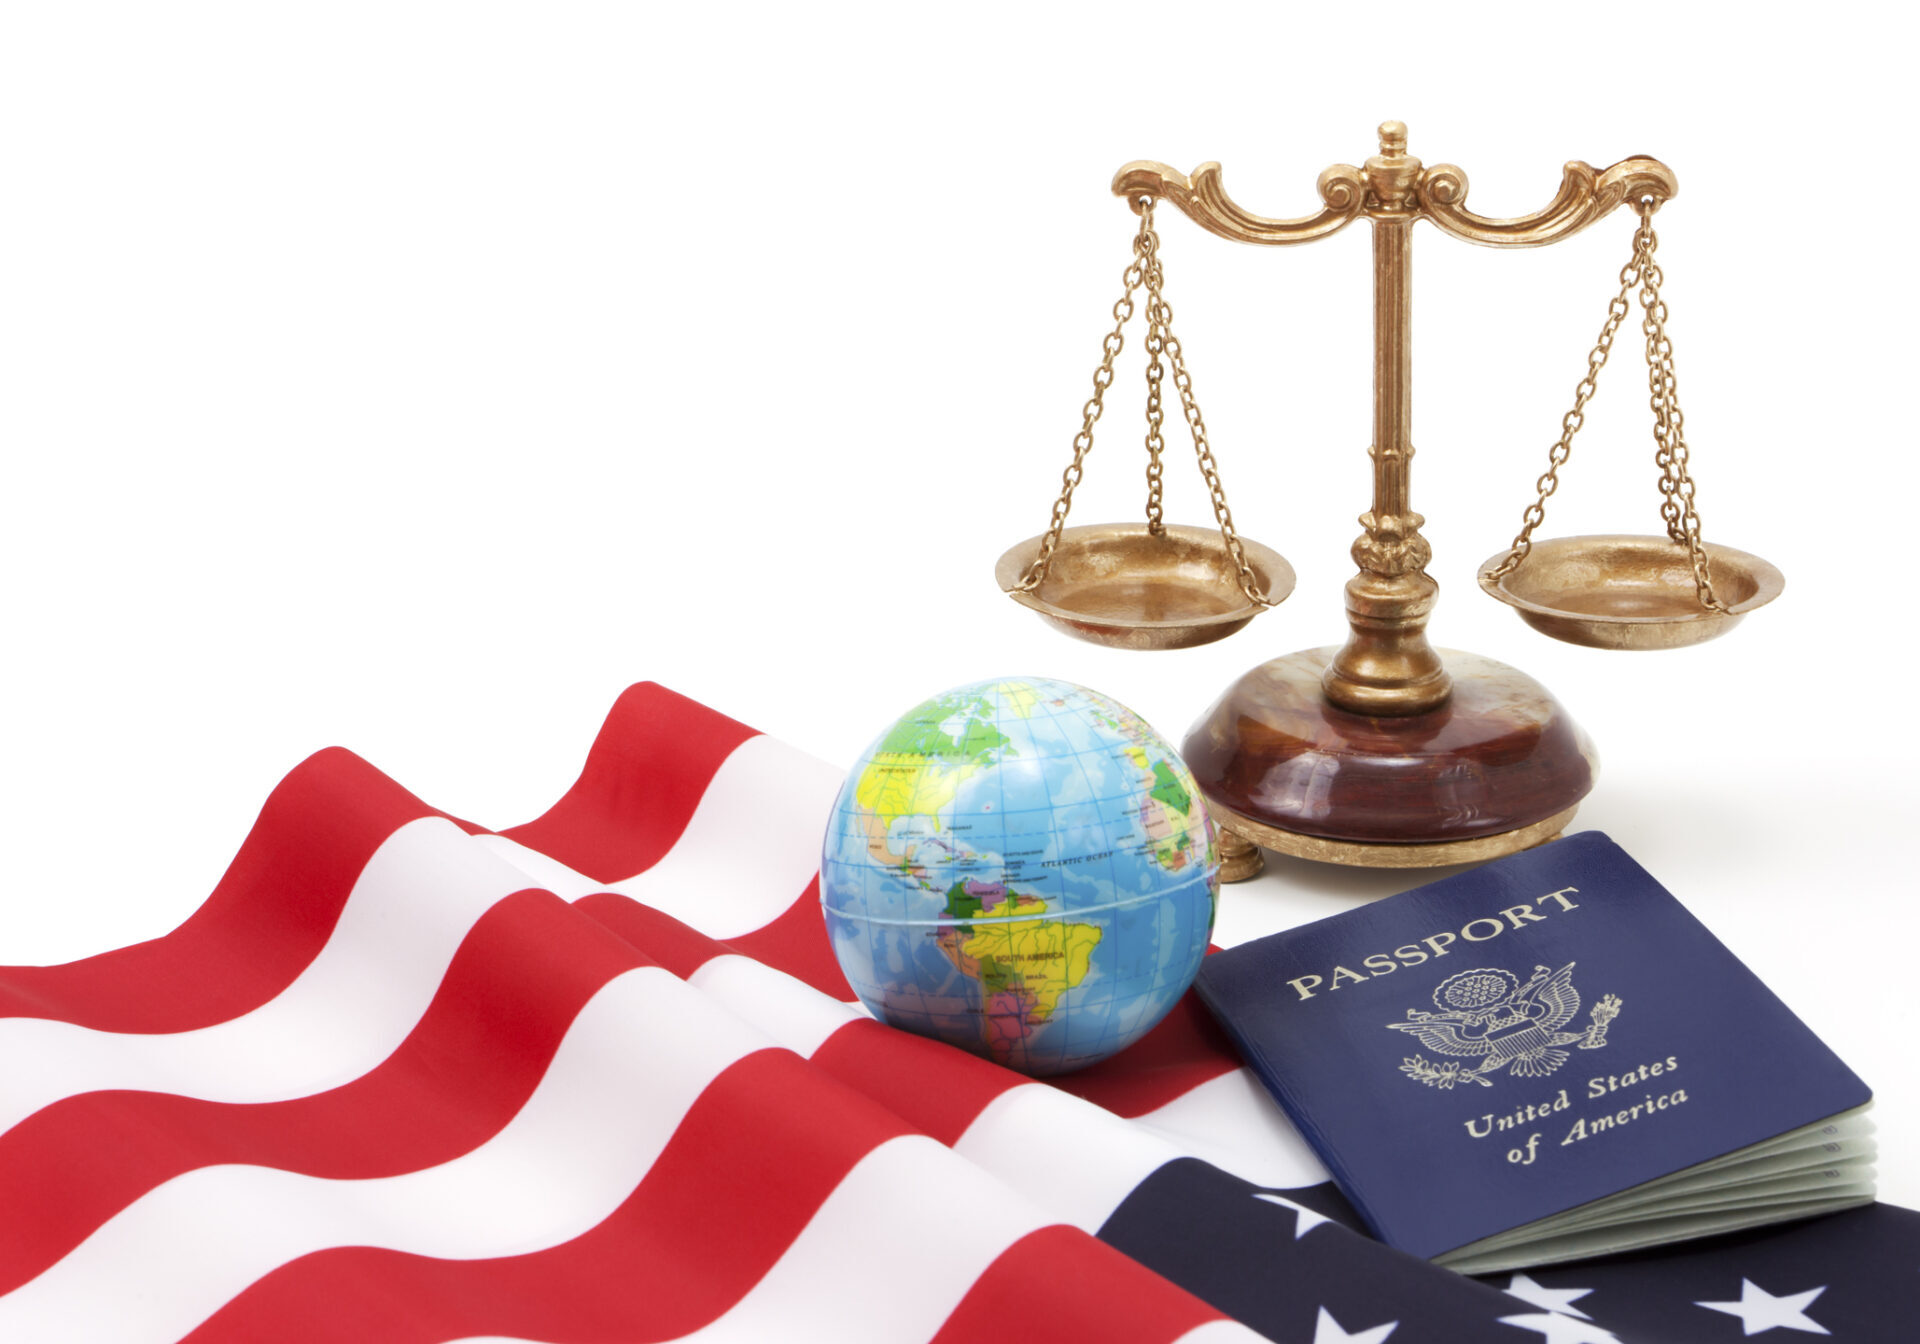 "Immigration concept with passport, globe, United States flag and scales of justice."